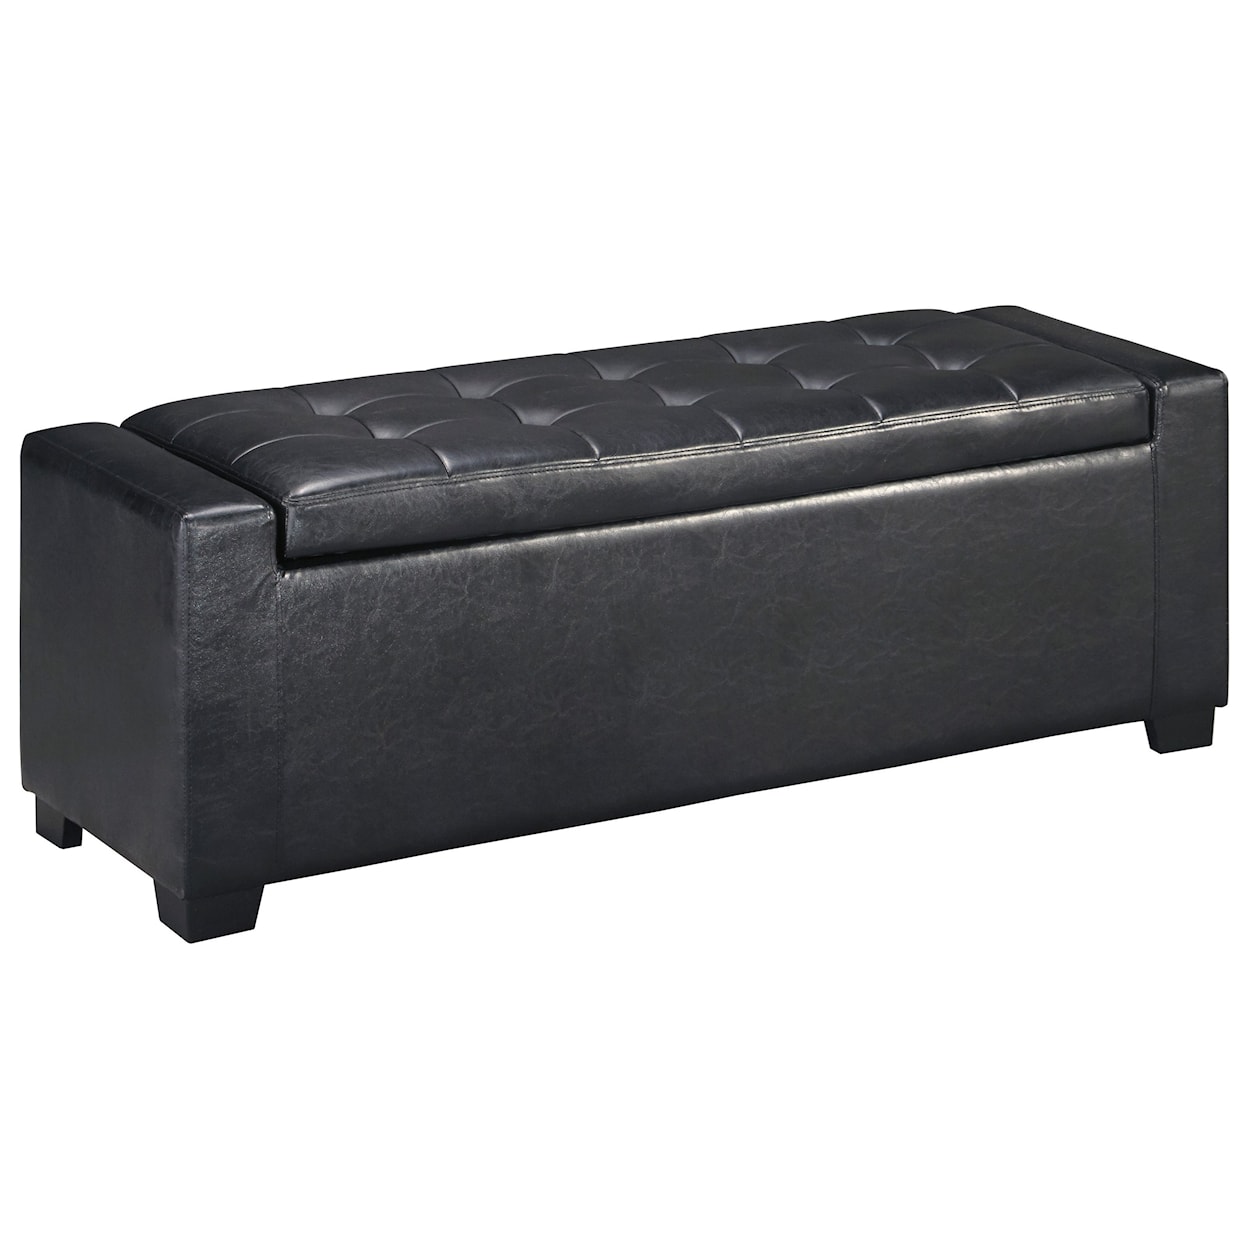 Signature Benches Upholstered Storage Bench